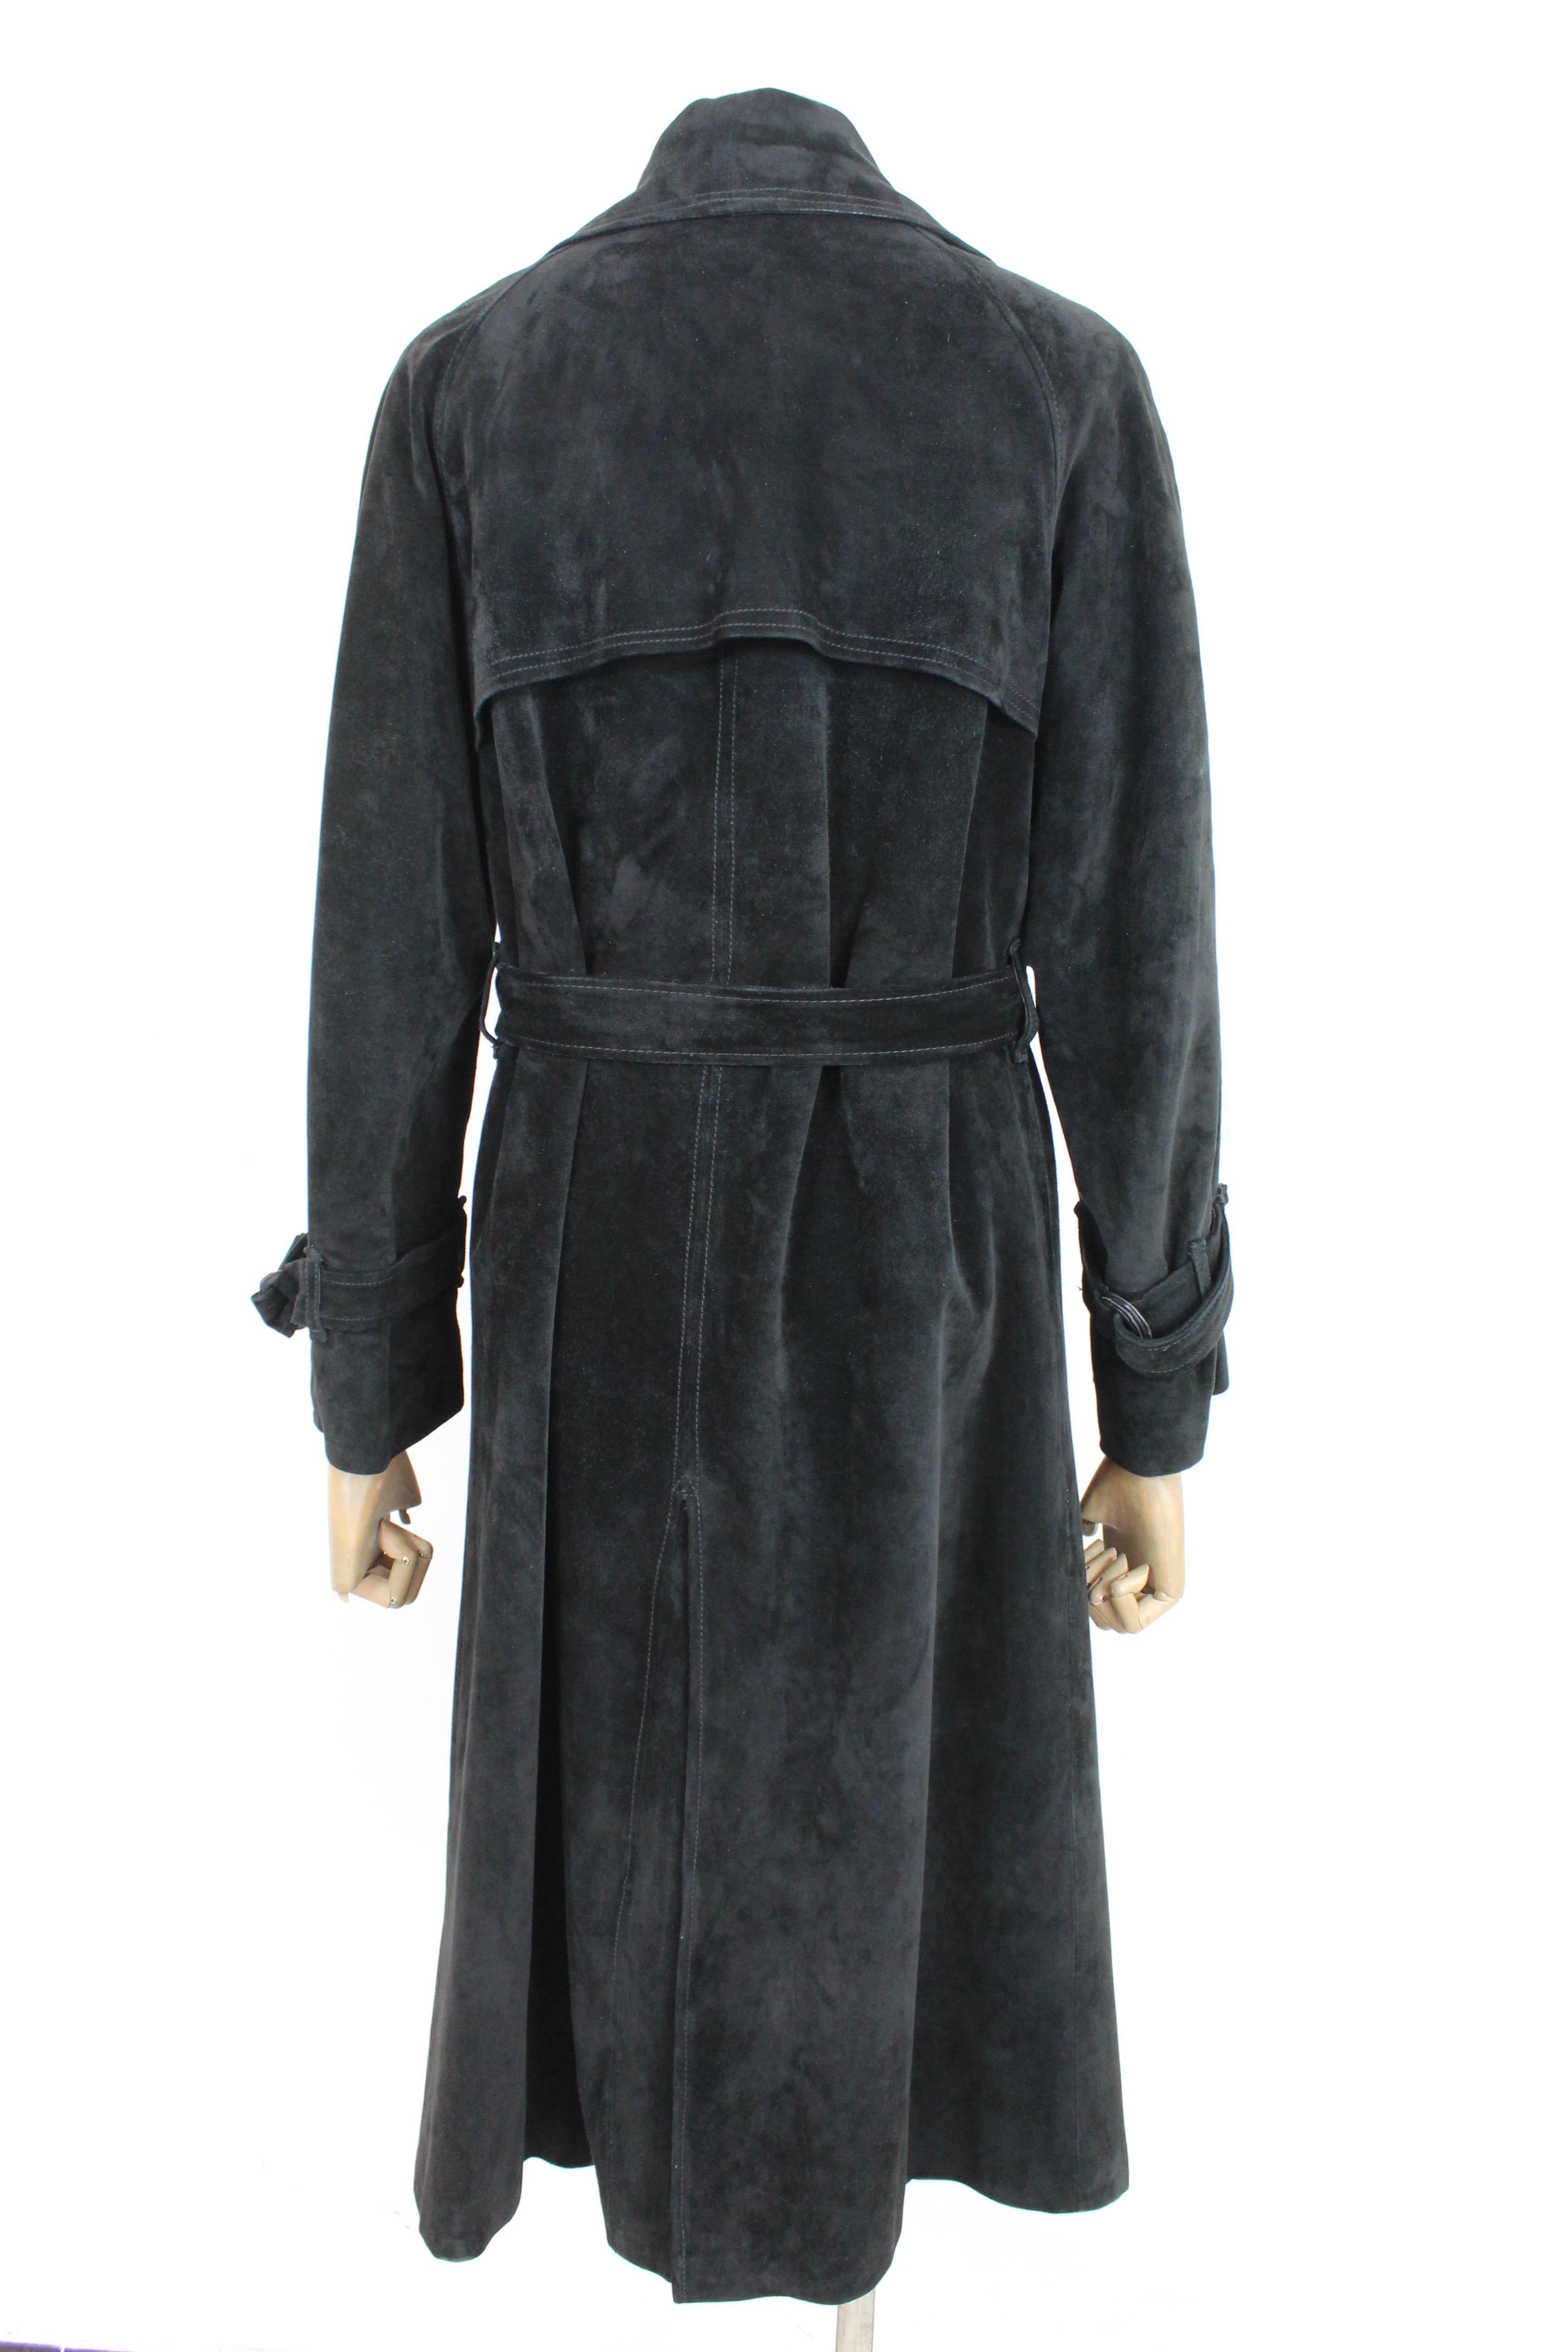 Vintage 80s leather coat. Long trench coat for women, black color. Button closure and belt at the waist. 100% suede fabric, internally lined. Made in Italy

Size: 48 It 14 Us 16 Uk

Shoulder: 48 cm
Bust / Chest: 52 cm
Sleeve: 60 cm
Length: 119